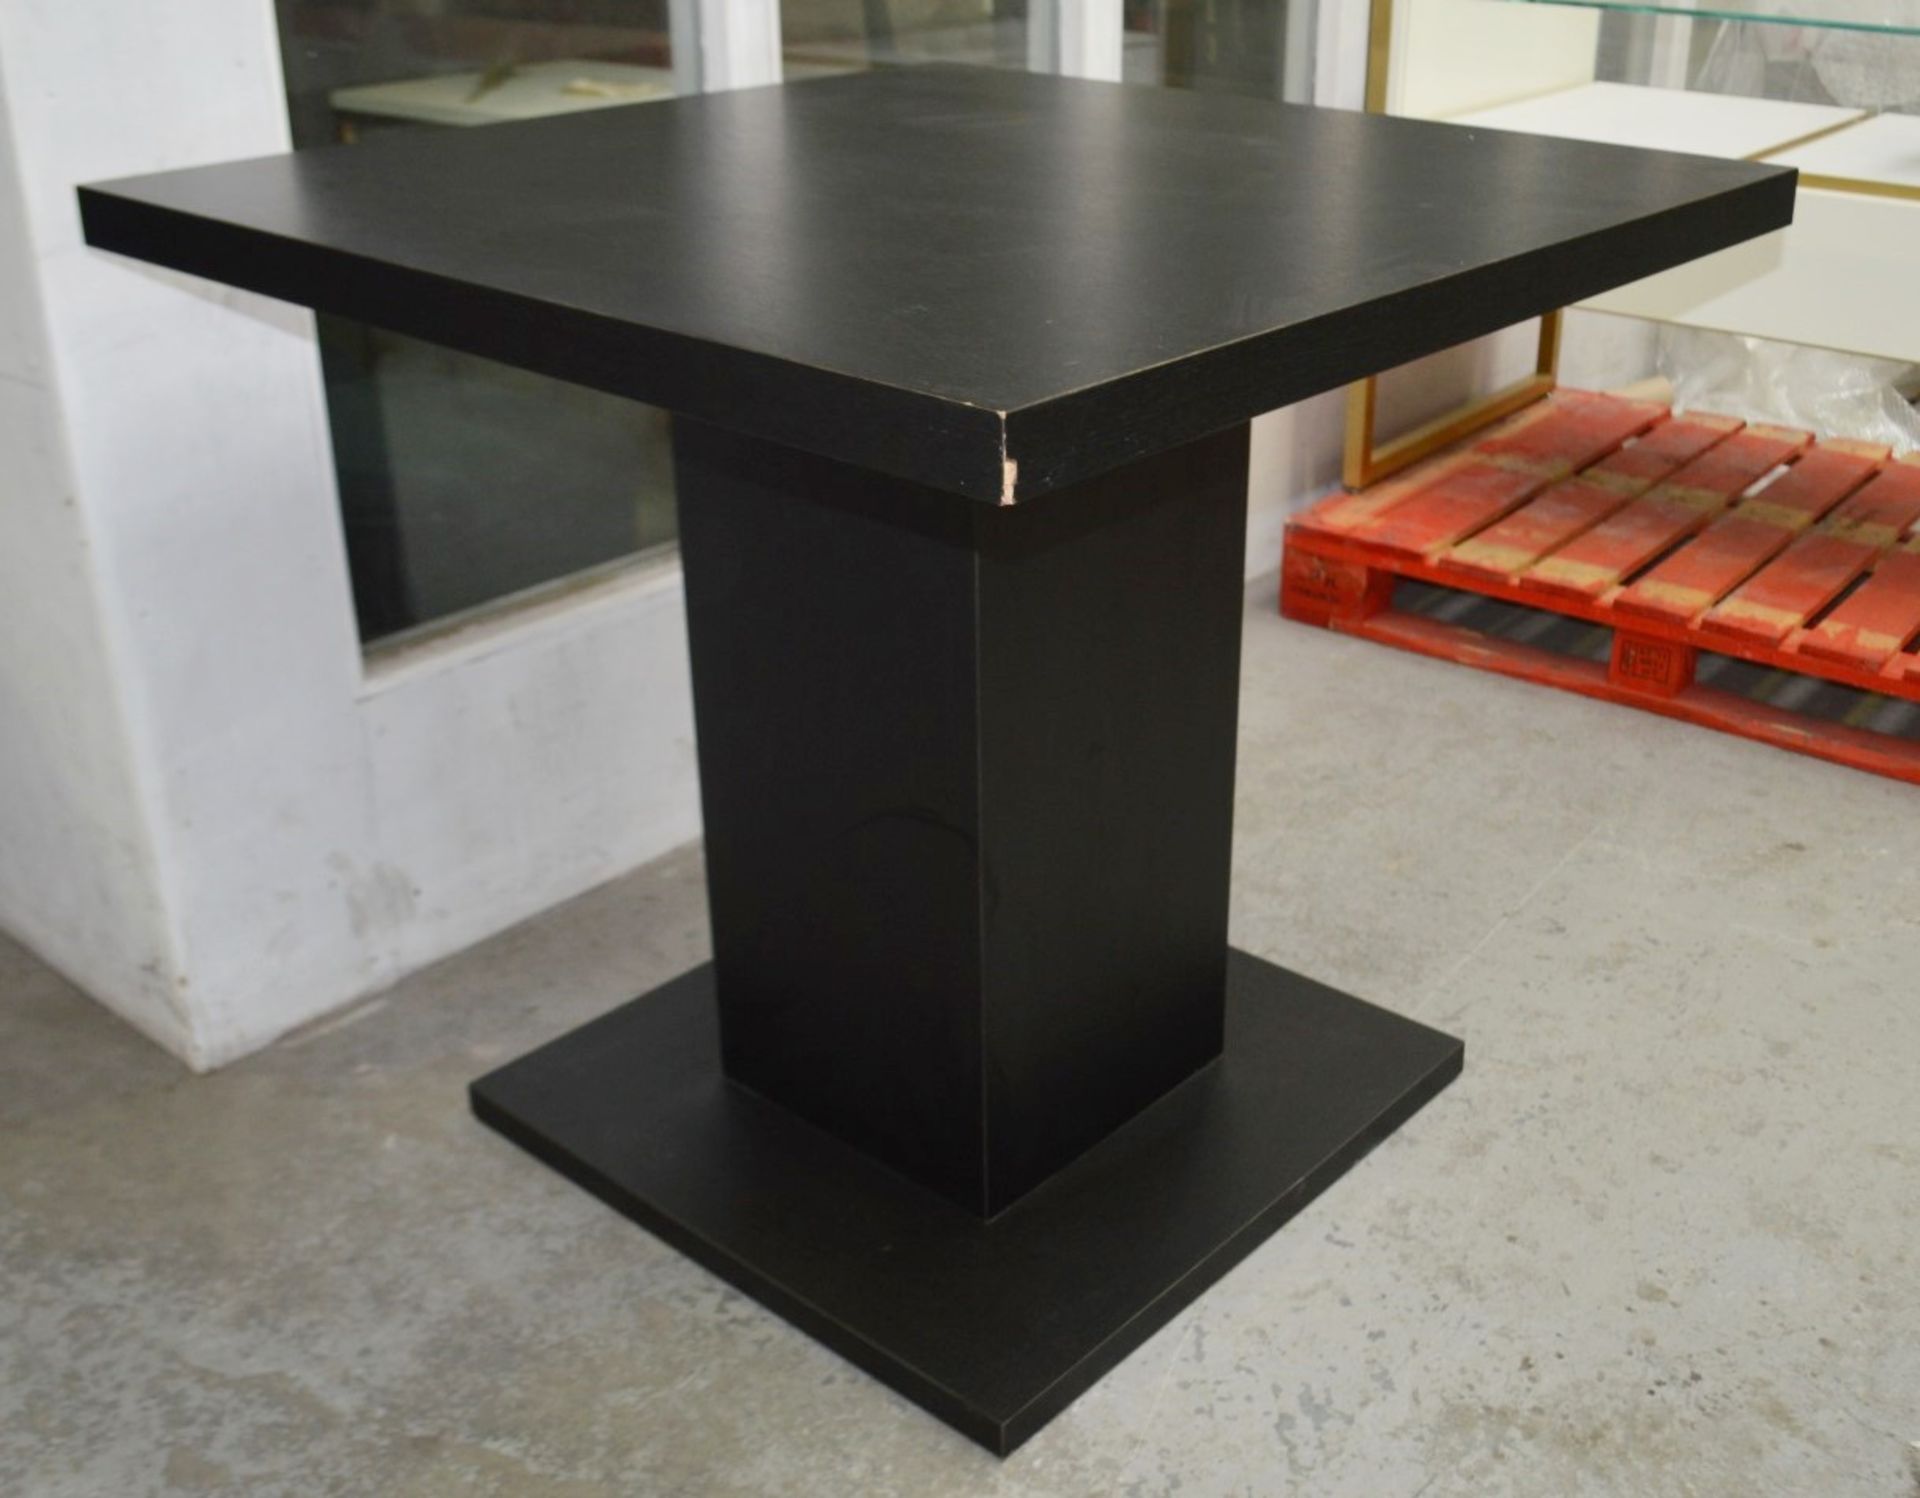 1 x Large Square Dining / Meeting Table In A Dark Wood Veneer With 4 Leather Upholstered Stools - Image 4 of 10